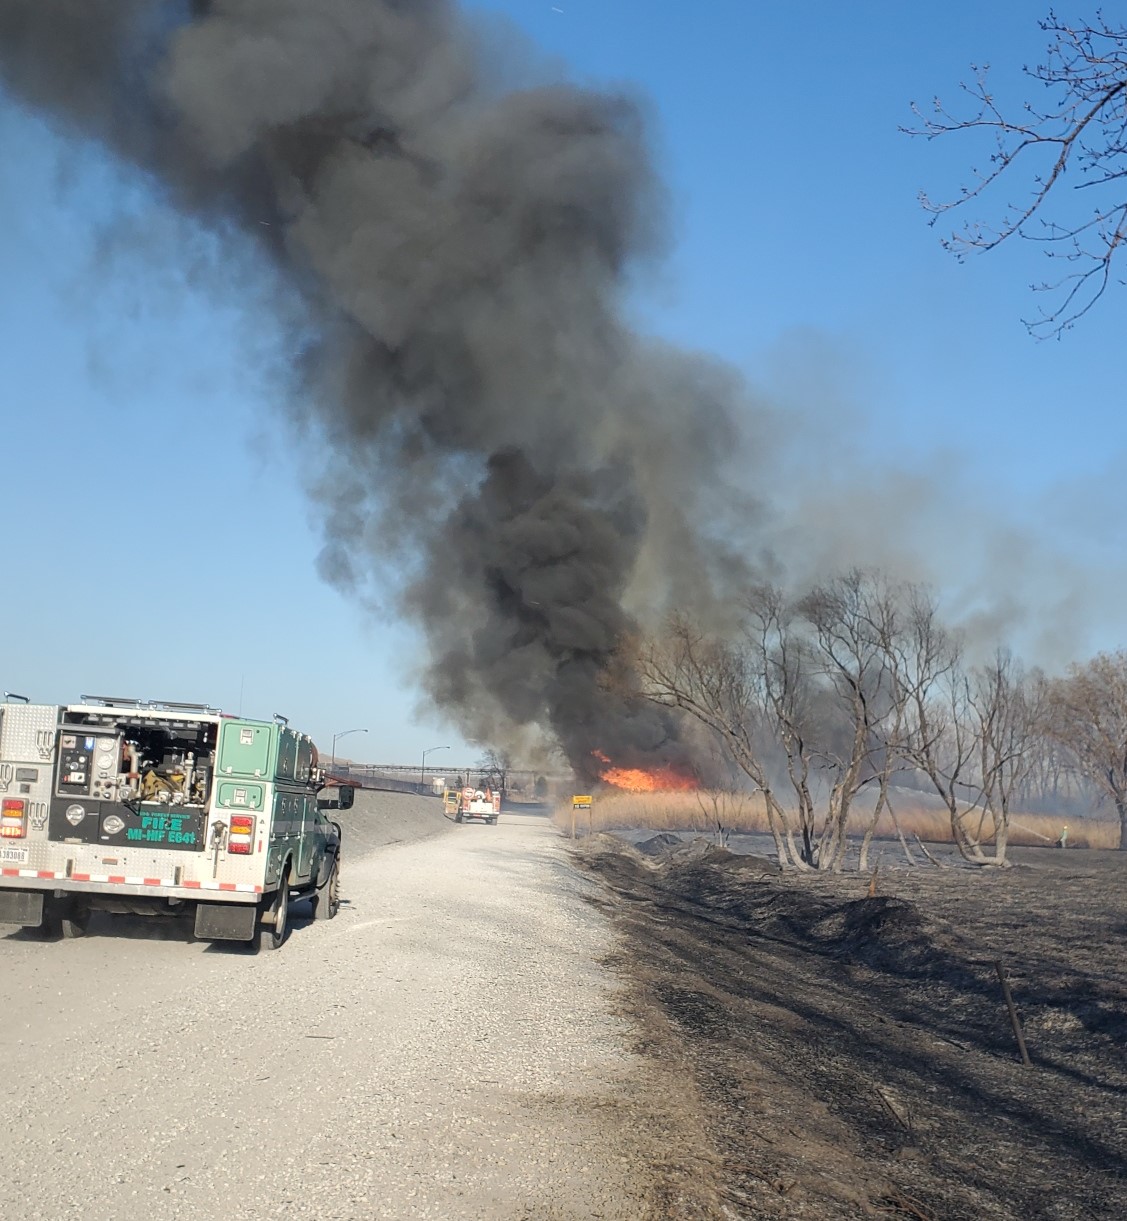 A US Forest Service wildland fire engine assists NPS and Burns Harbor Fire firefighters late Friday afternoon on a wildland fire in the Port of Indiana. NPS Photo/Ramirez.